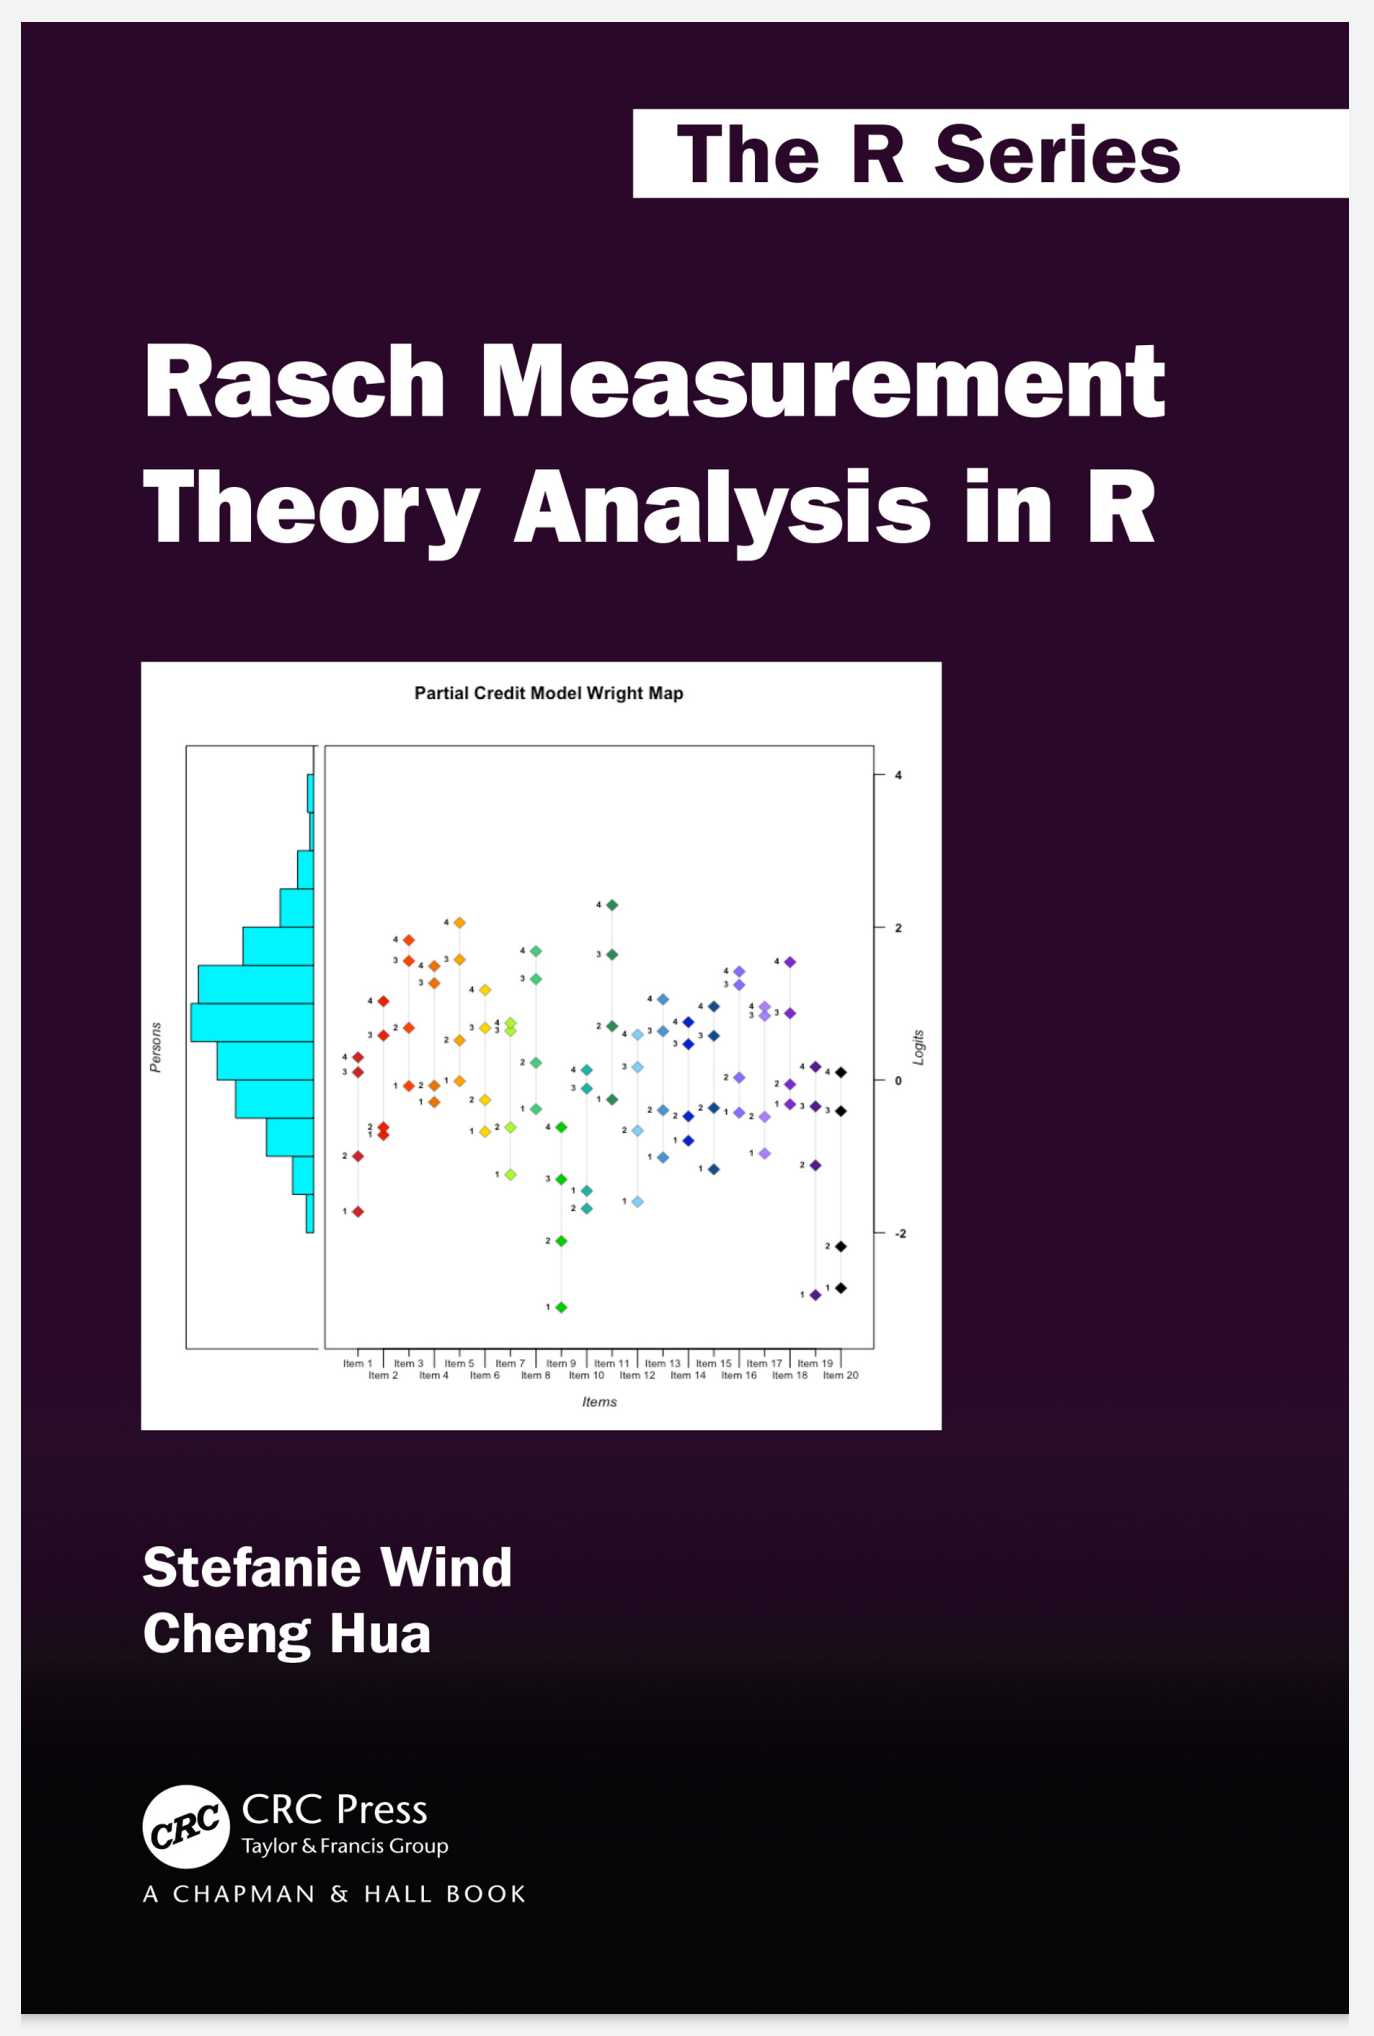 Rasch Measurement Theory Analysis in R